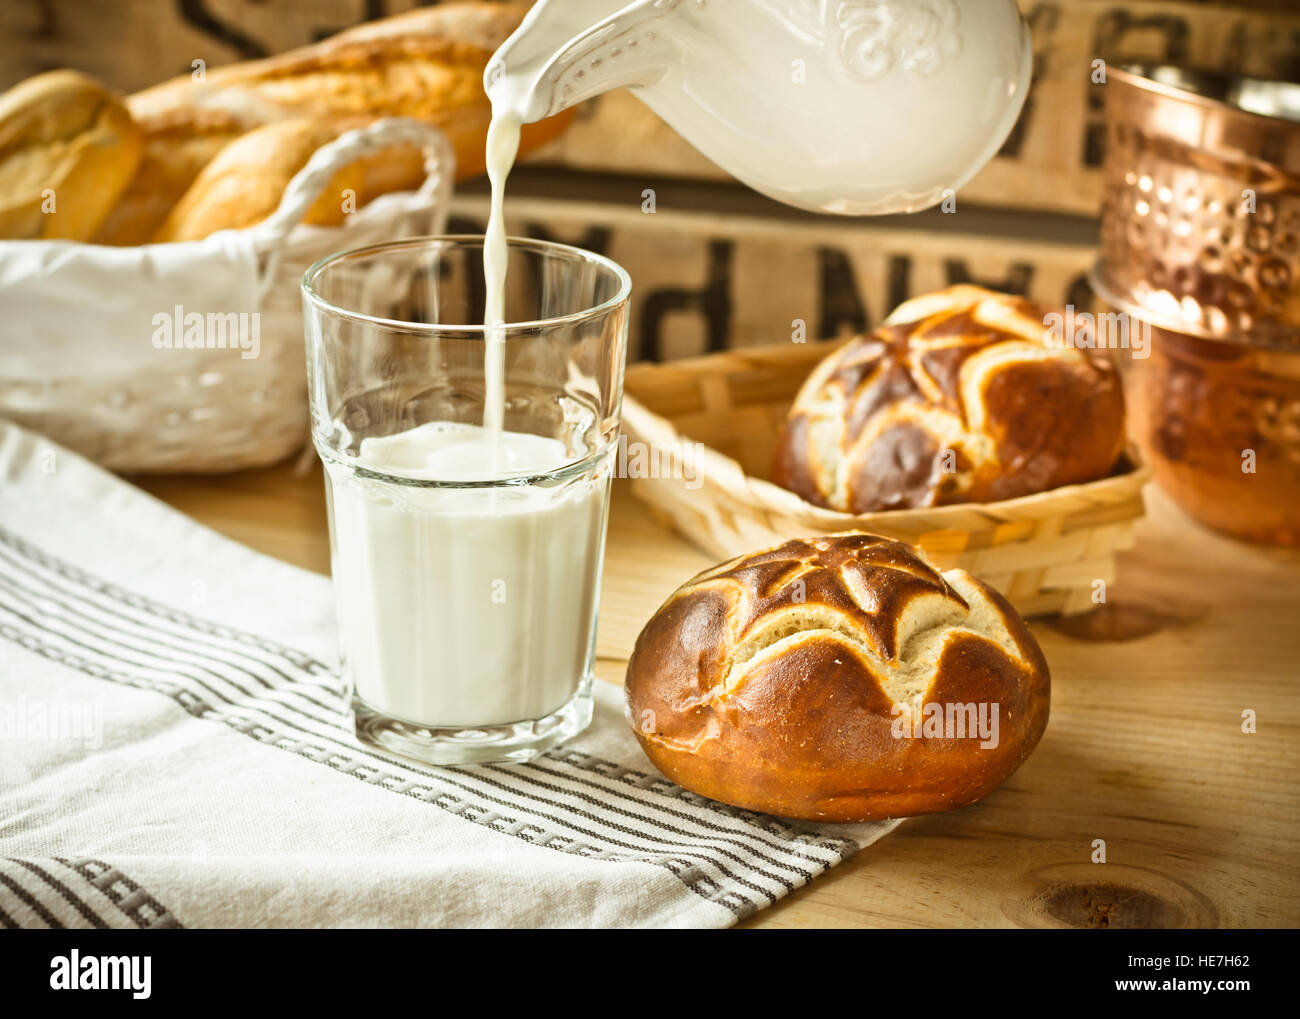 Fresh lye rolls in a wicker basket, process of pouring milk into a glass from pitcher, wood table, rustic style kitchen interior Stock Photo